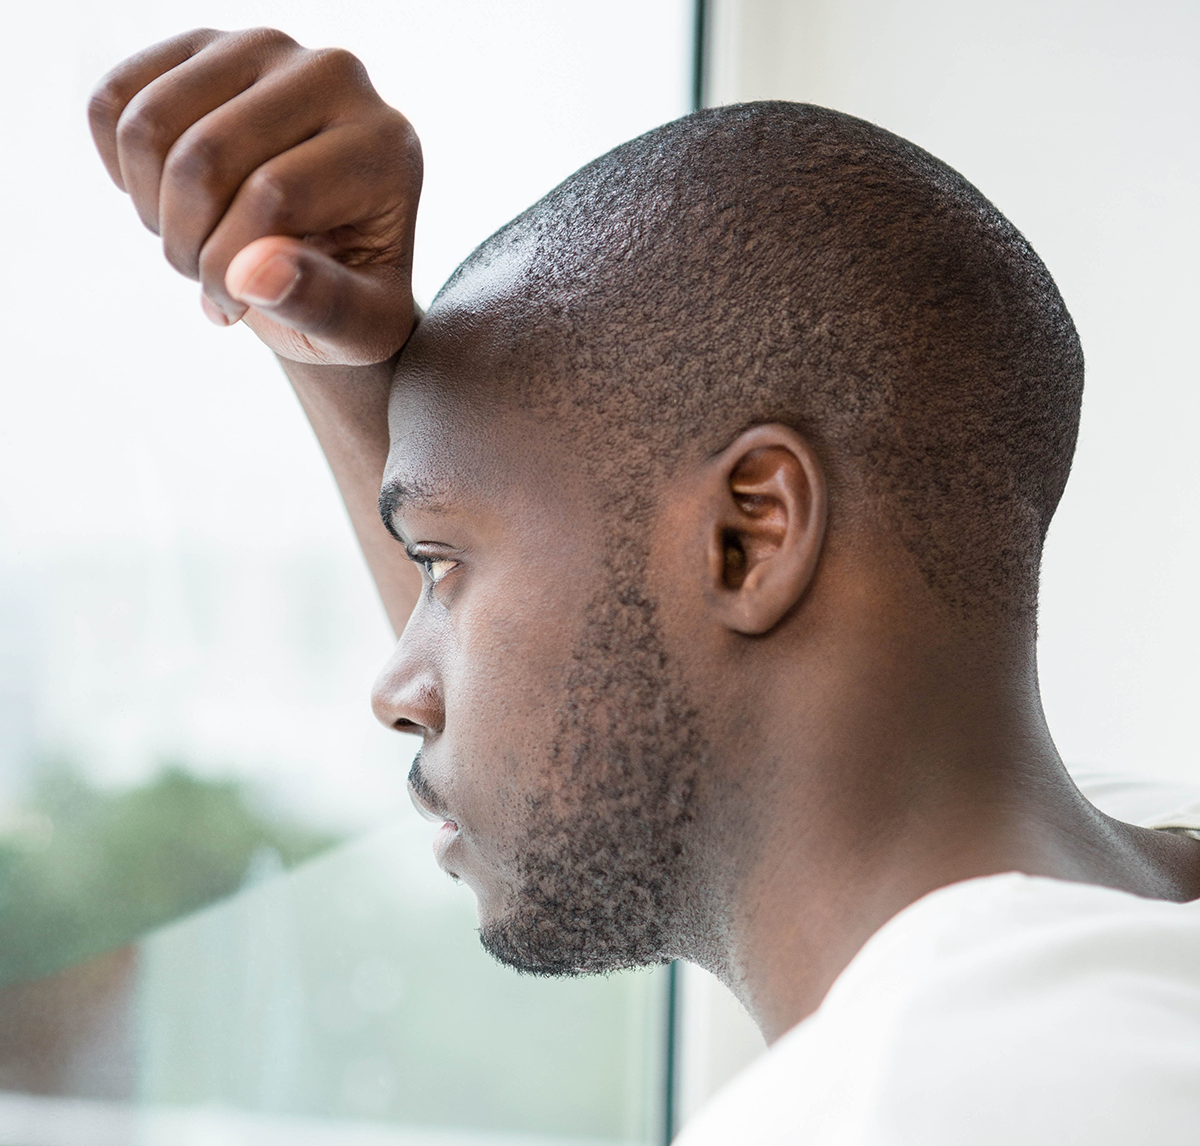 sad man looking out the window - men's health month